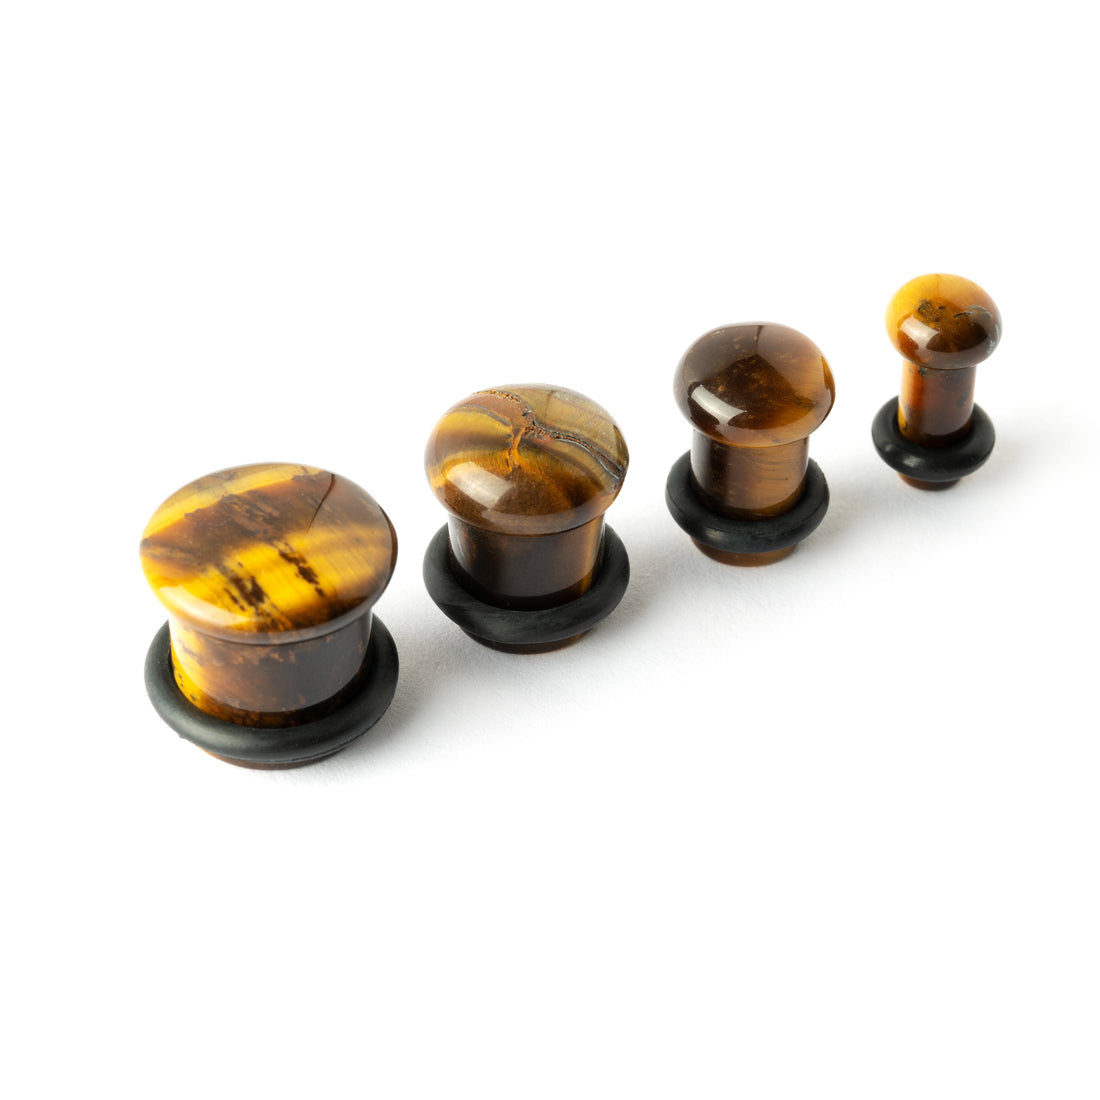 several sizes of Single Flare Tiger Eye stone ear plugs front and side view